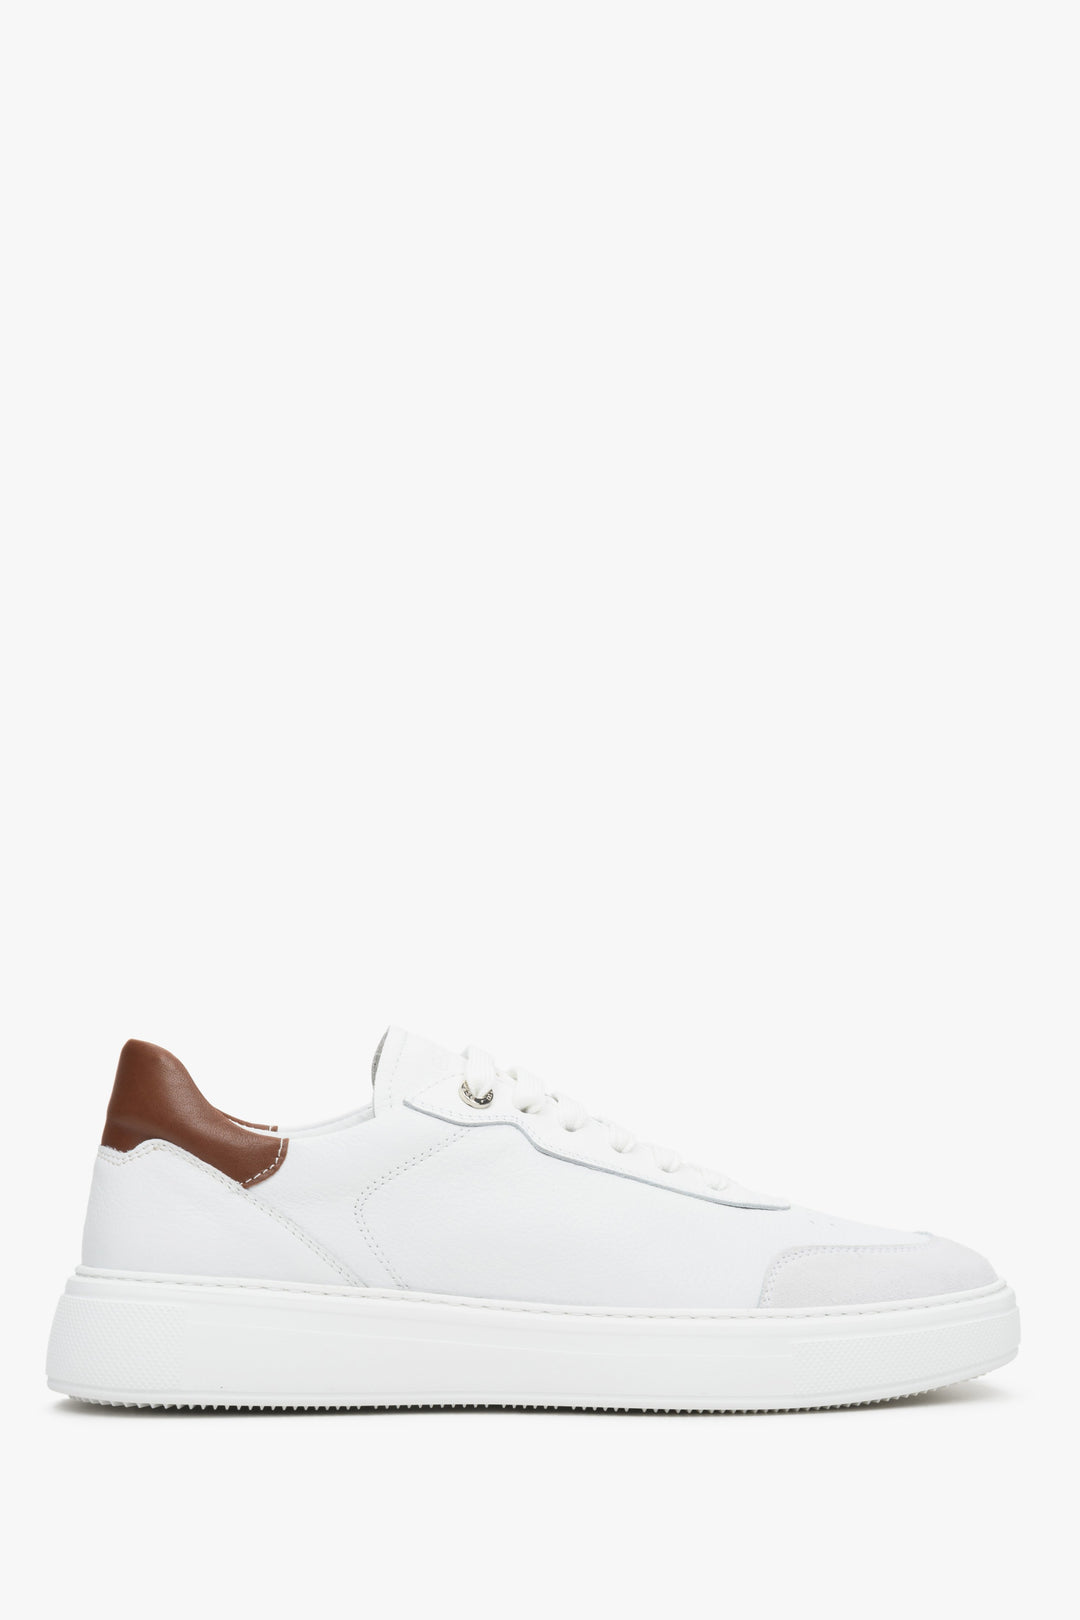 Natural nubuck and leather men's sneakers in white by Estro.